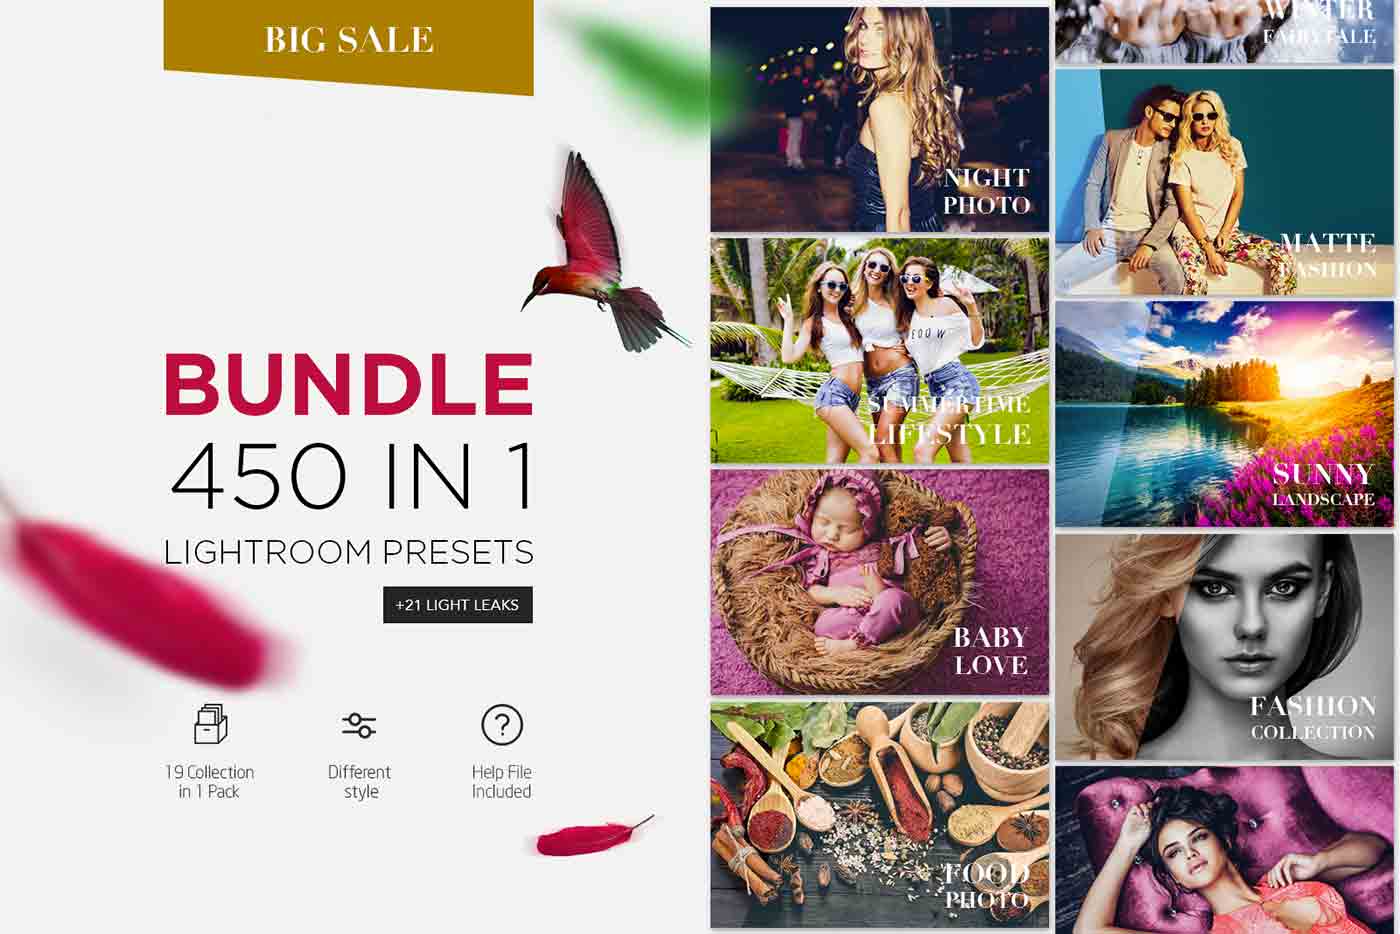 Pro Bundle 450 in 1 Lightroom Preset, 19 different collections in 1 pack.